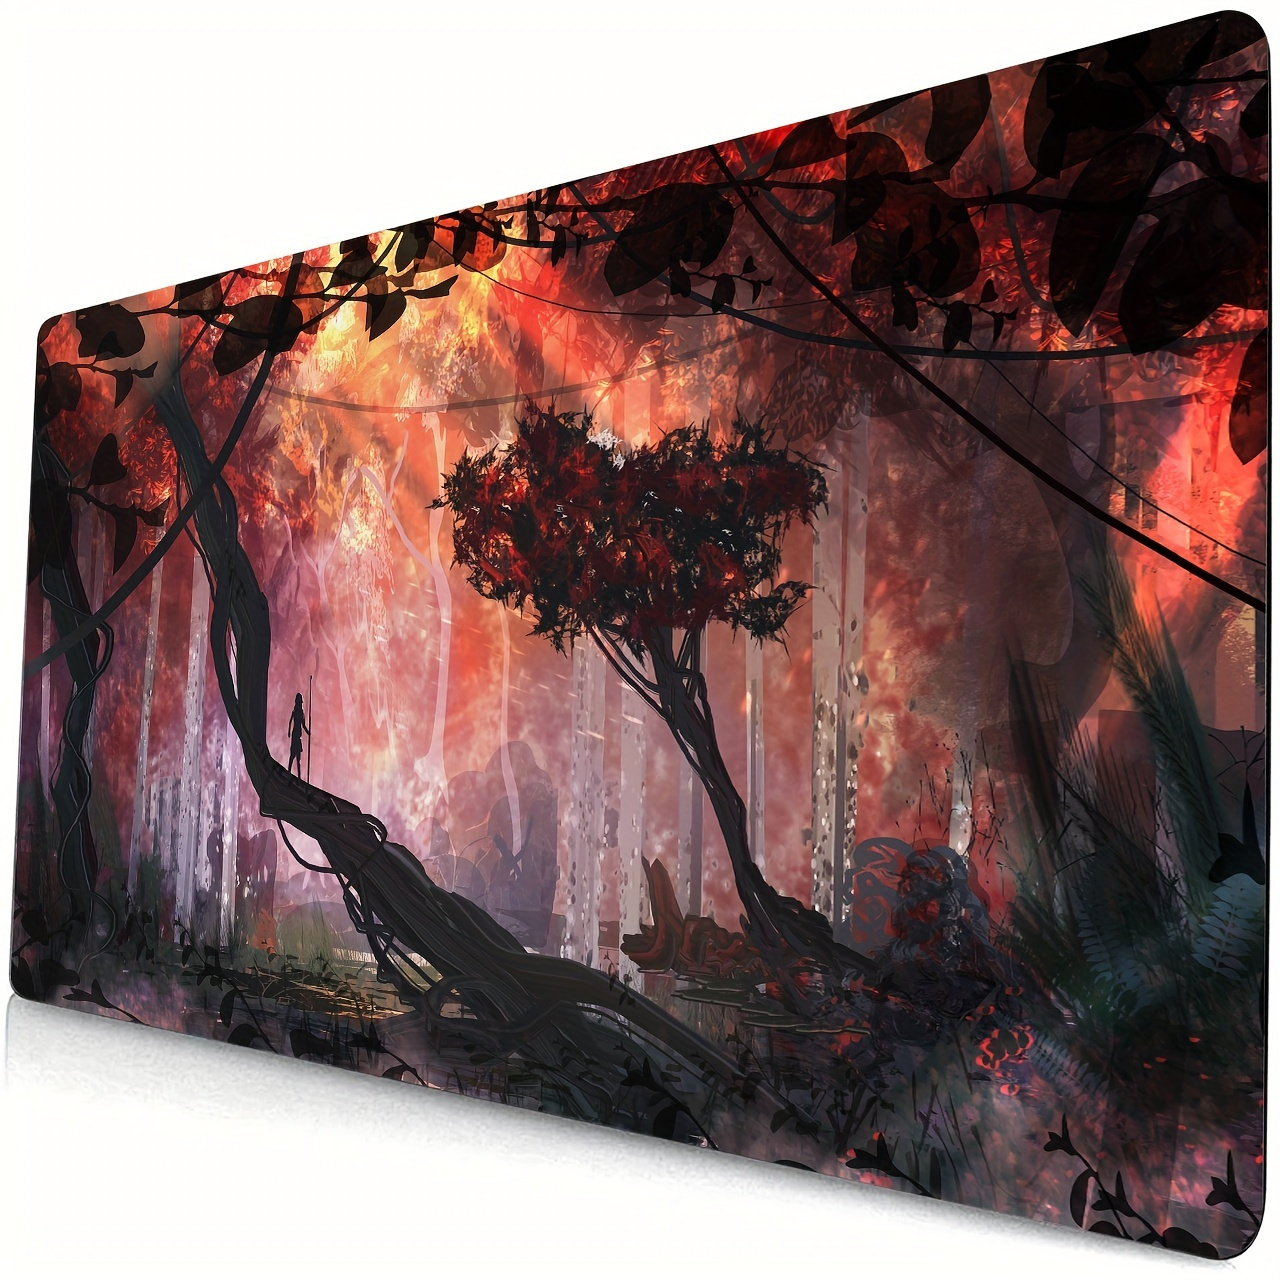 

1pc Magic Forest Tree Mouse Pad Desktop Mat Large Computer Keyboard Pad Anime Game Mouse Pad Board And Card Game Pad Tcg Playmat Table Mats Compatible For Mtg Rpg Ccg Trading Card Game Play Mats